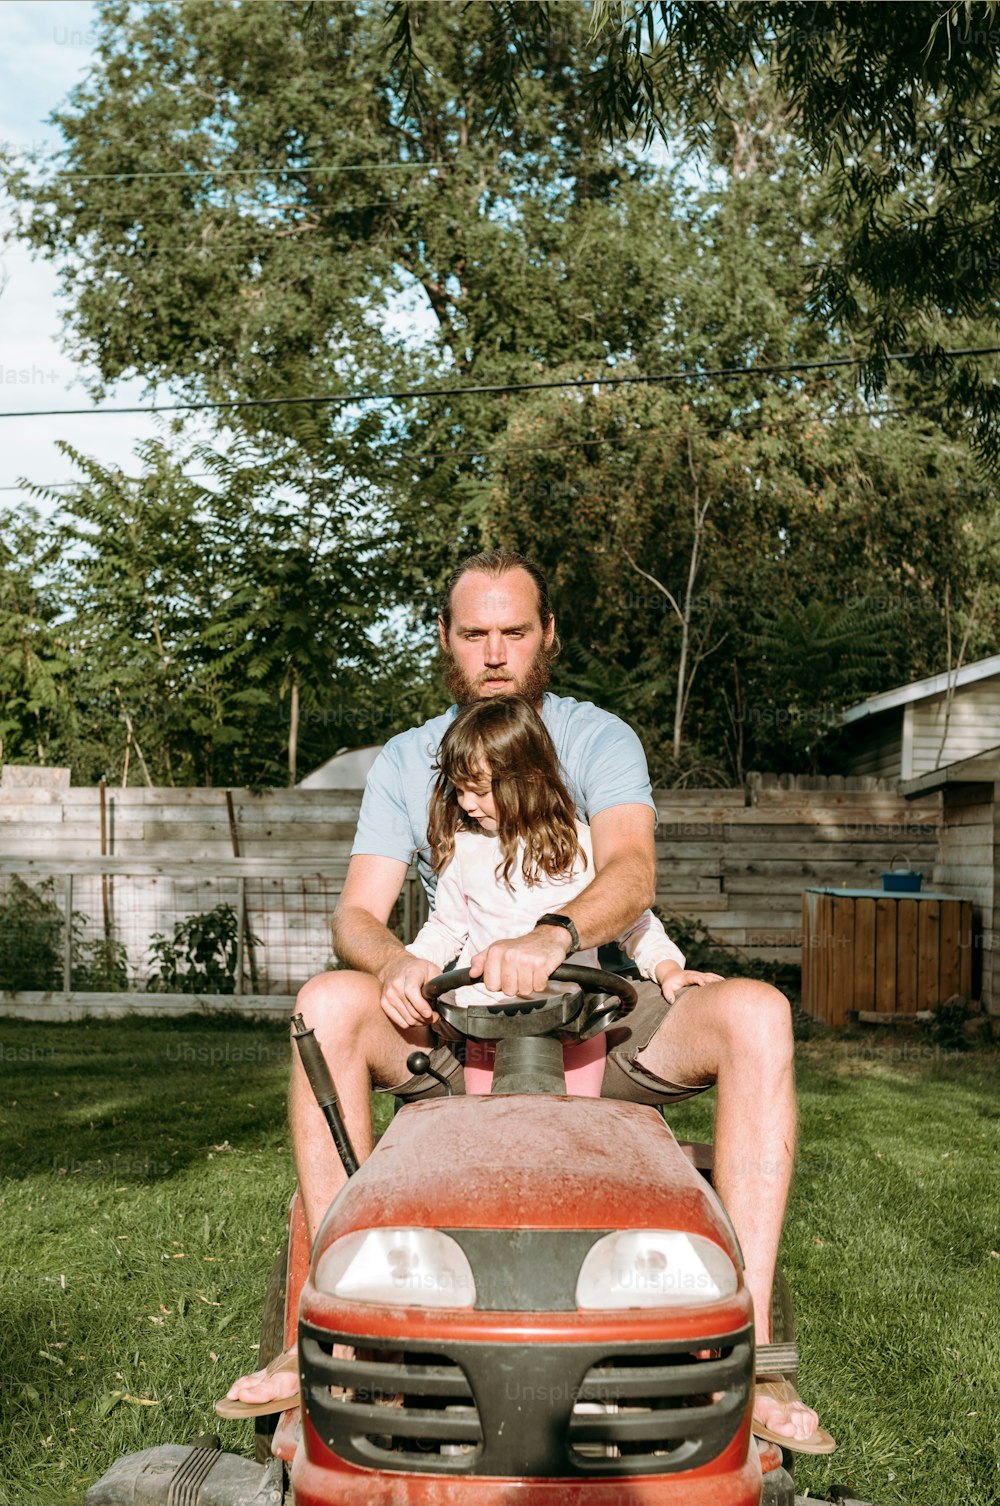 a man and a little girl sitting on a lawn mower